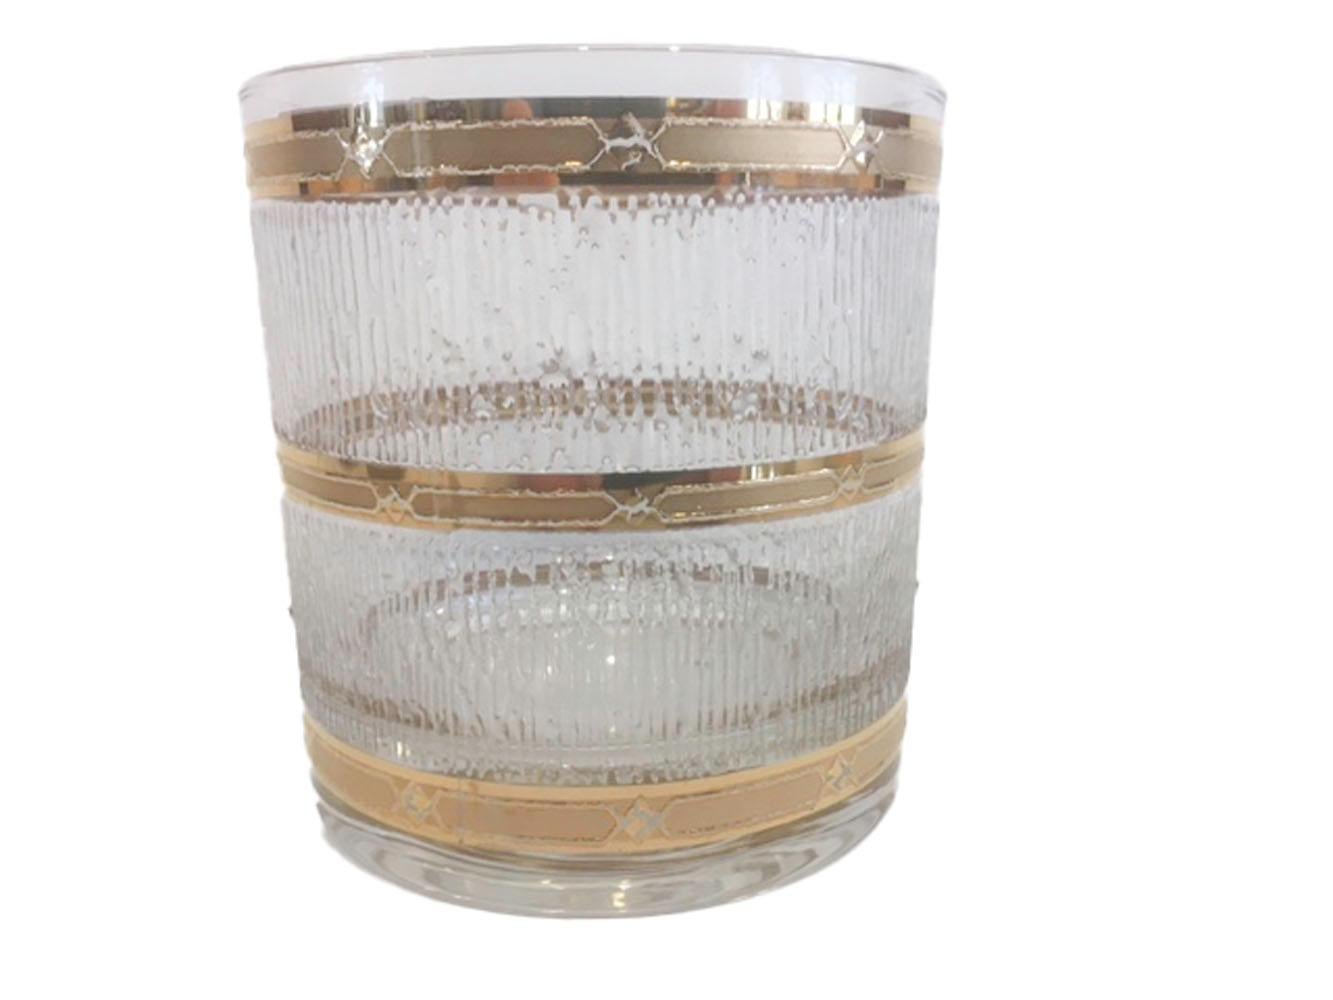 Mid-Century Modern Vintage Culver Rocks Glasses in the Icicle Pattern with 22 Karat Gold Bands